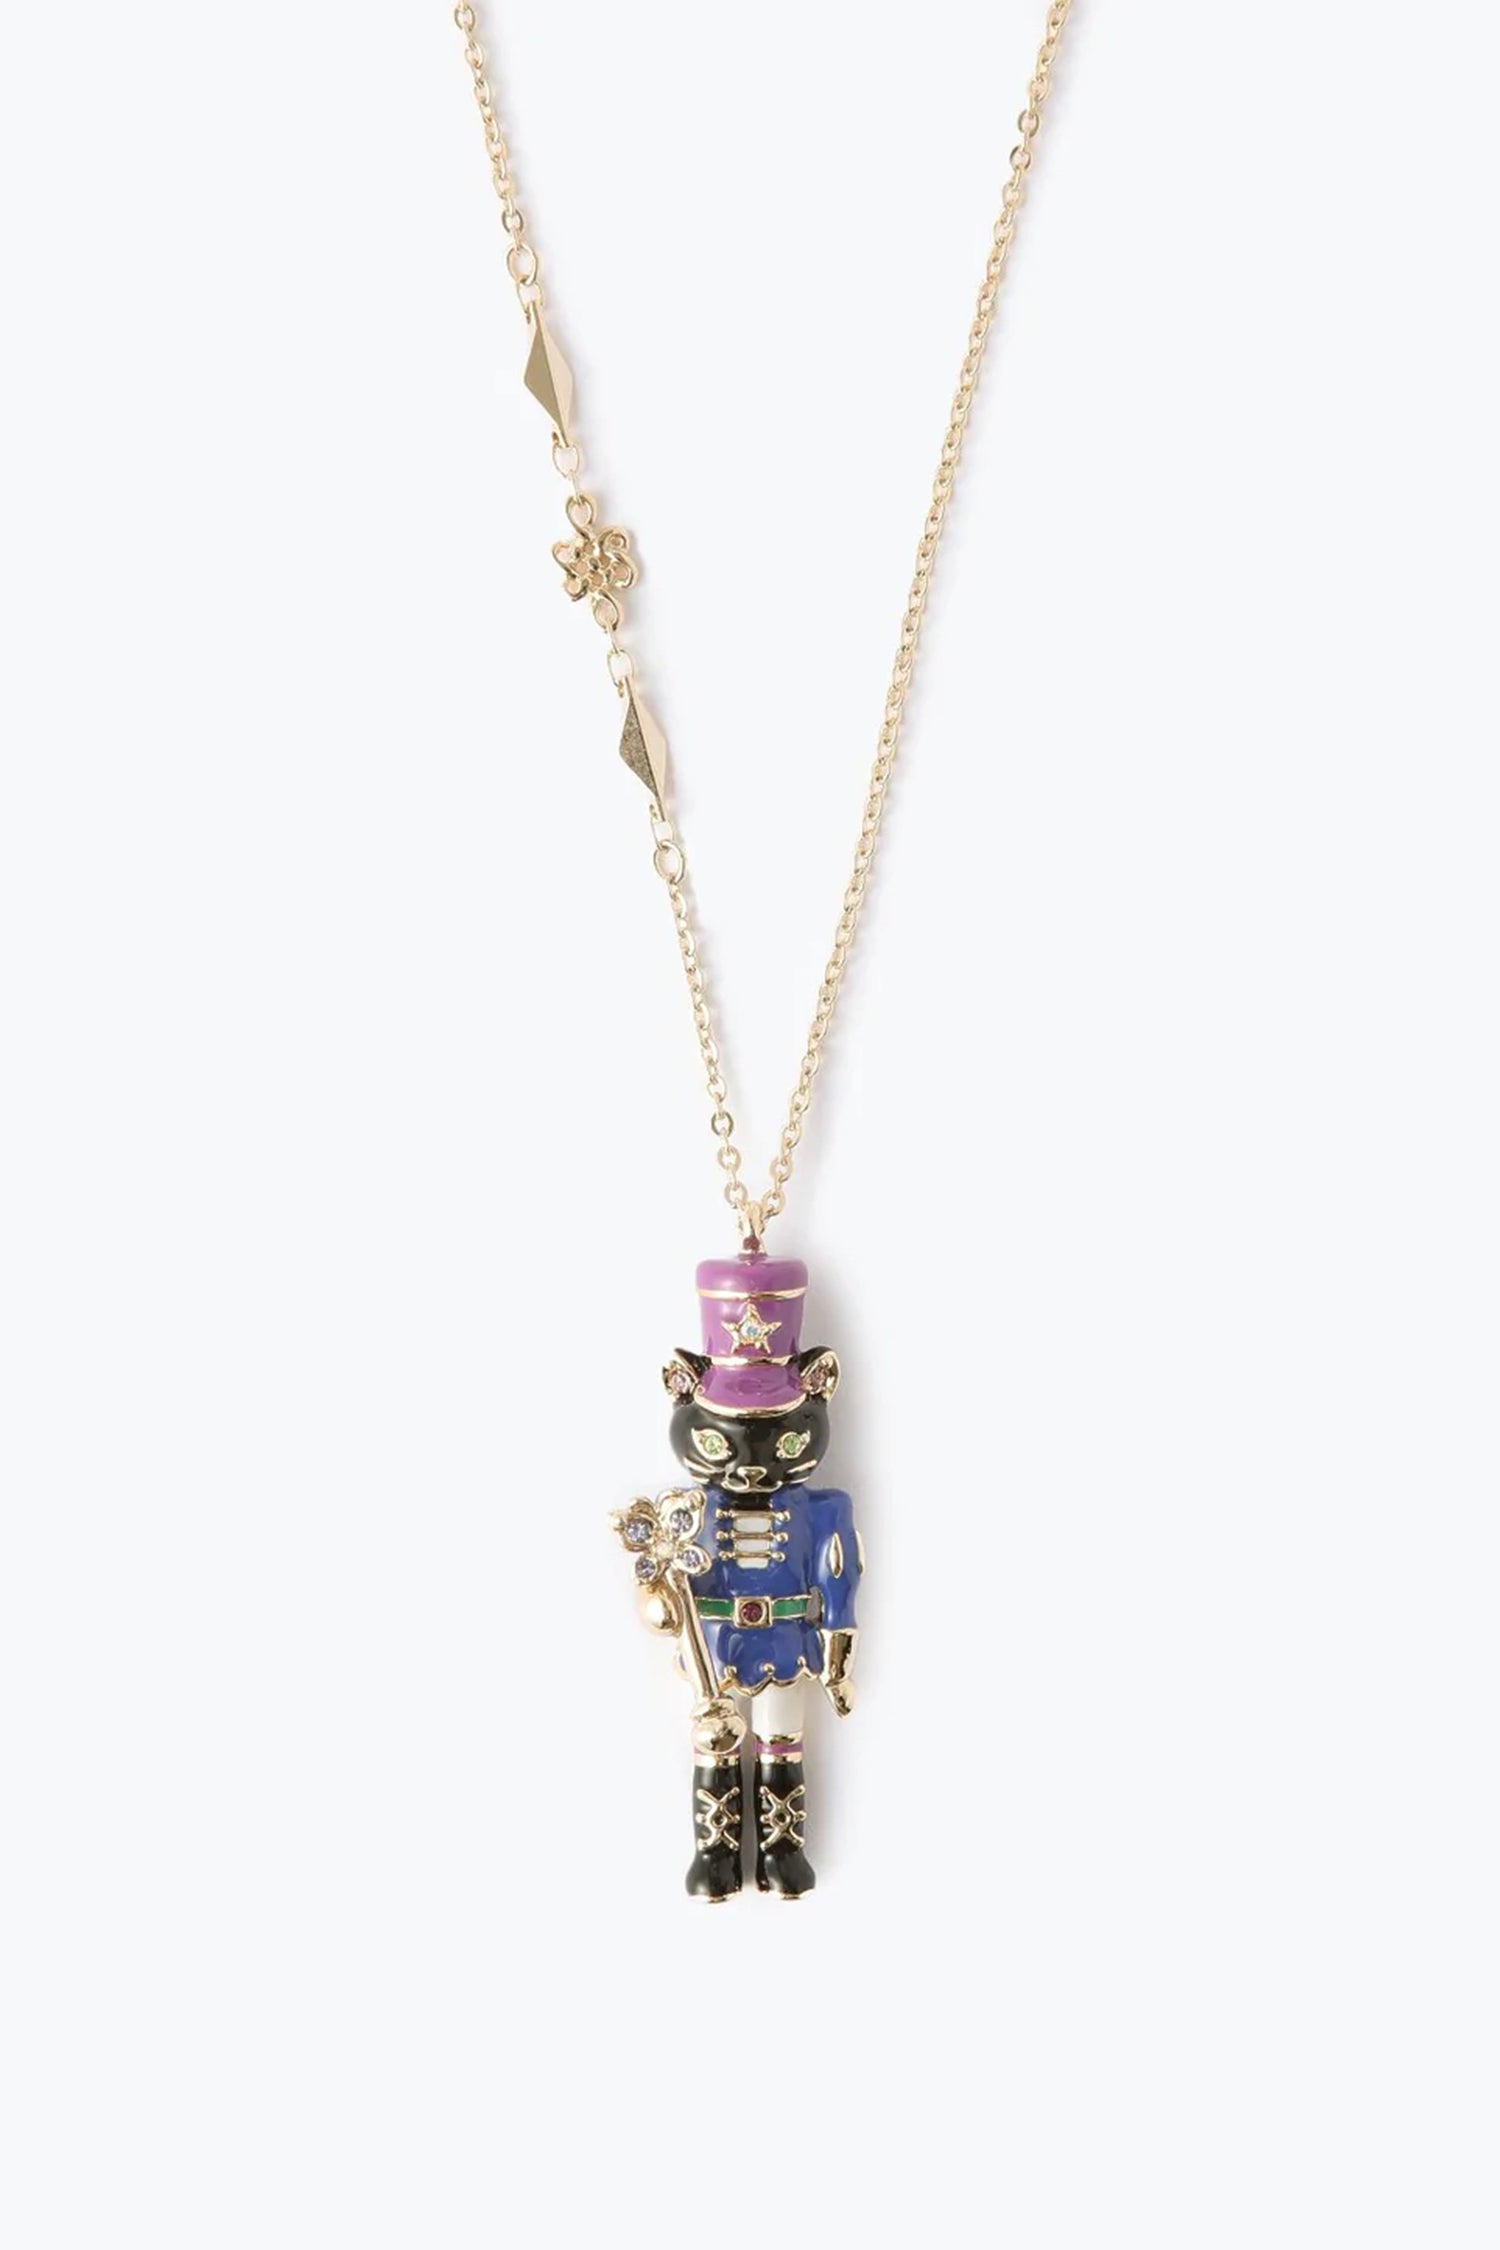 Cat Solider long pendant dressed as nutcracker on golden chain with butterfly adorn